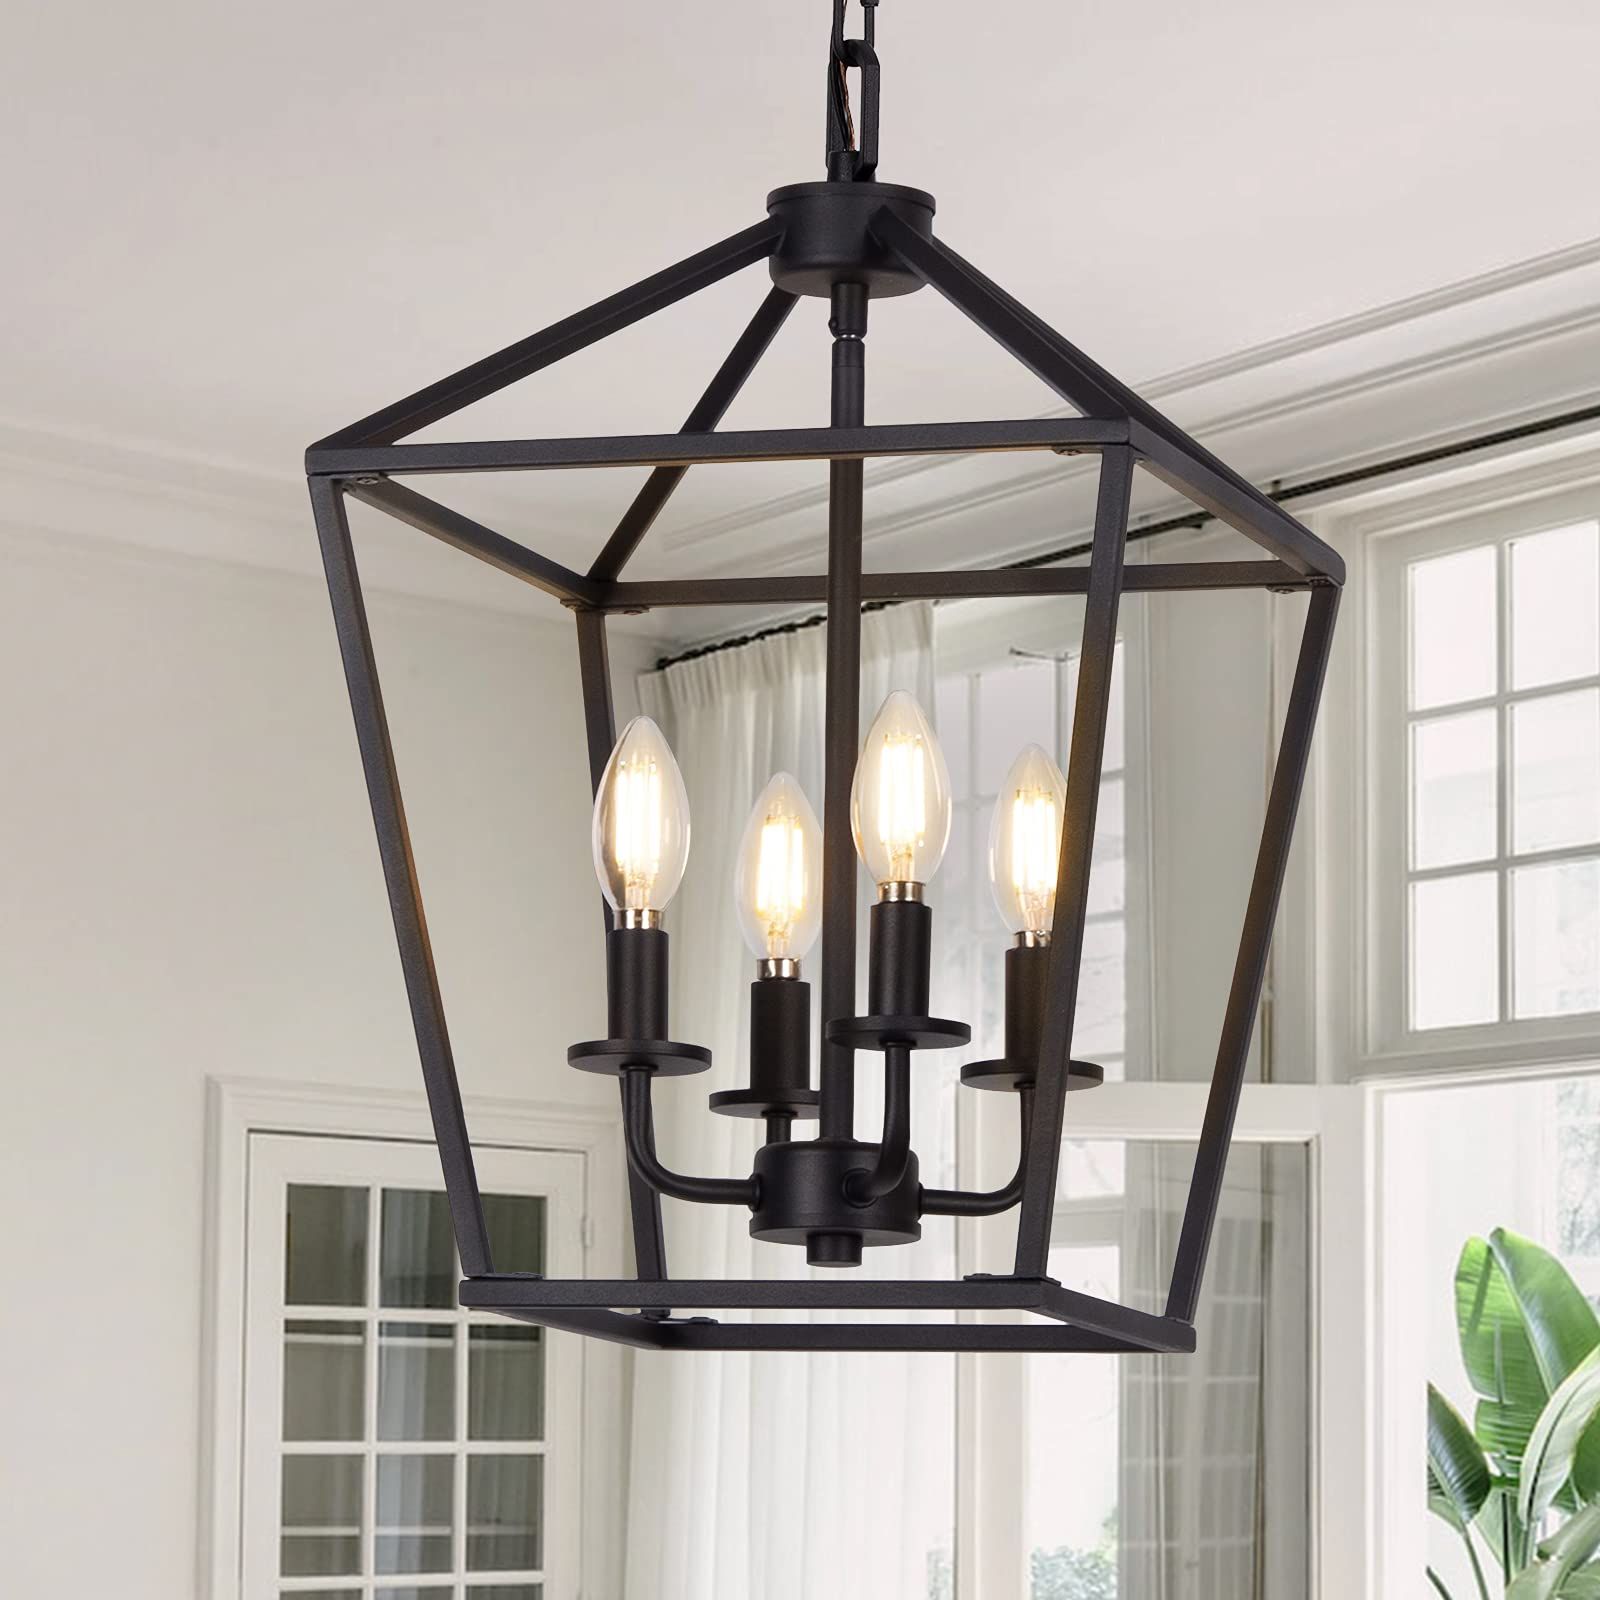 Adjustable Lantern Chandeliers Throughout Most Recently Released 4 Light Pendant Lighting, Industrial Ceiling Light Black Lantern Chandelier  With Farmhouse Metal Cage Adjustable Height Rustic Geometric Hanging Light  E12 Base For Kitchen Island, Bedroom Or Entryway – – Amazon (View 1 of 15)